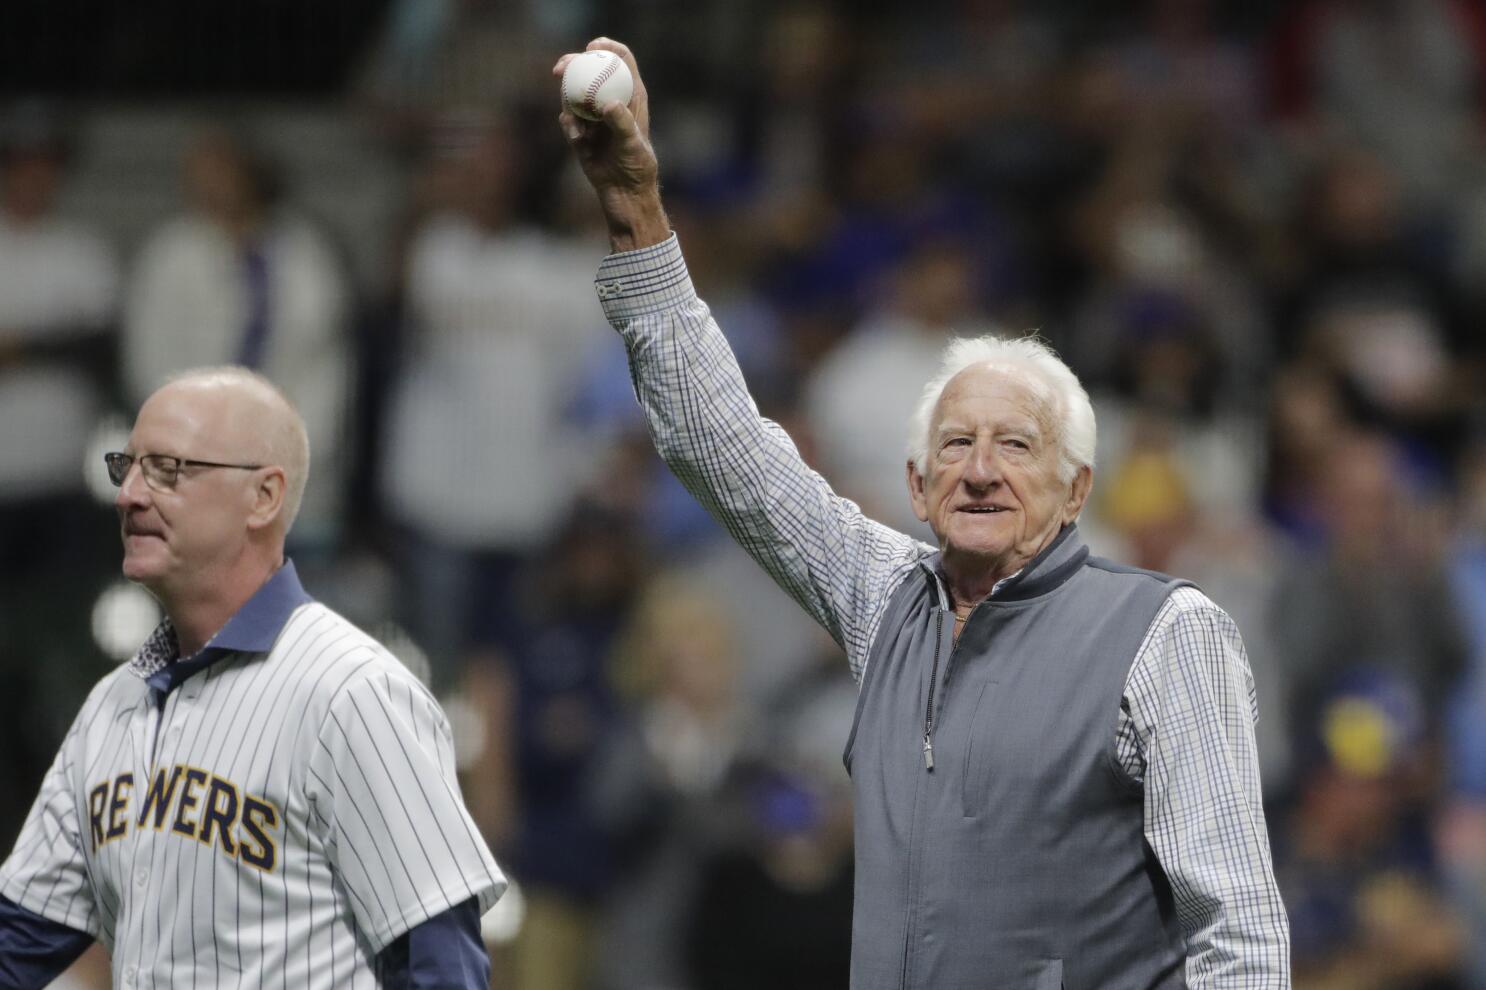 Brewers announcer Bob Uecker honored for 50 years behind mic - The